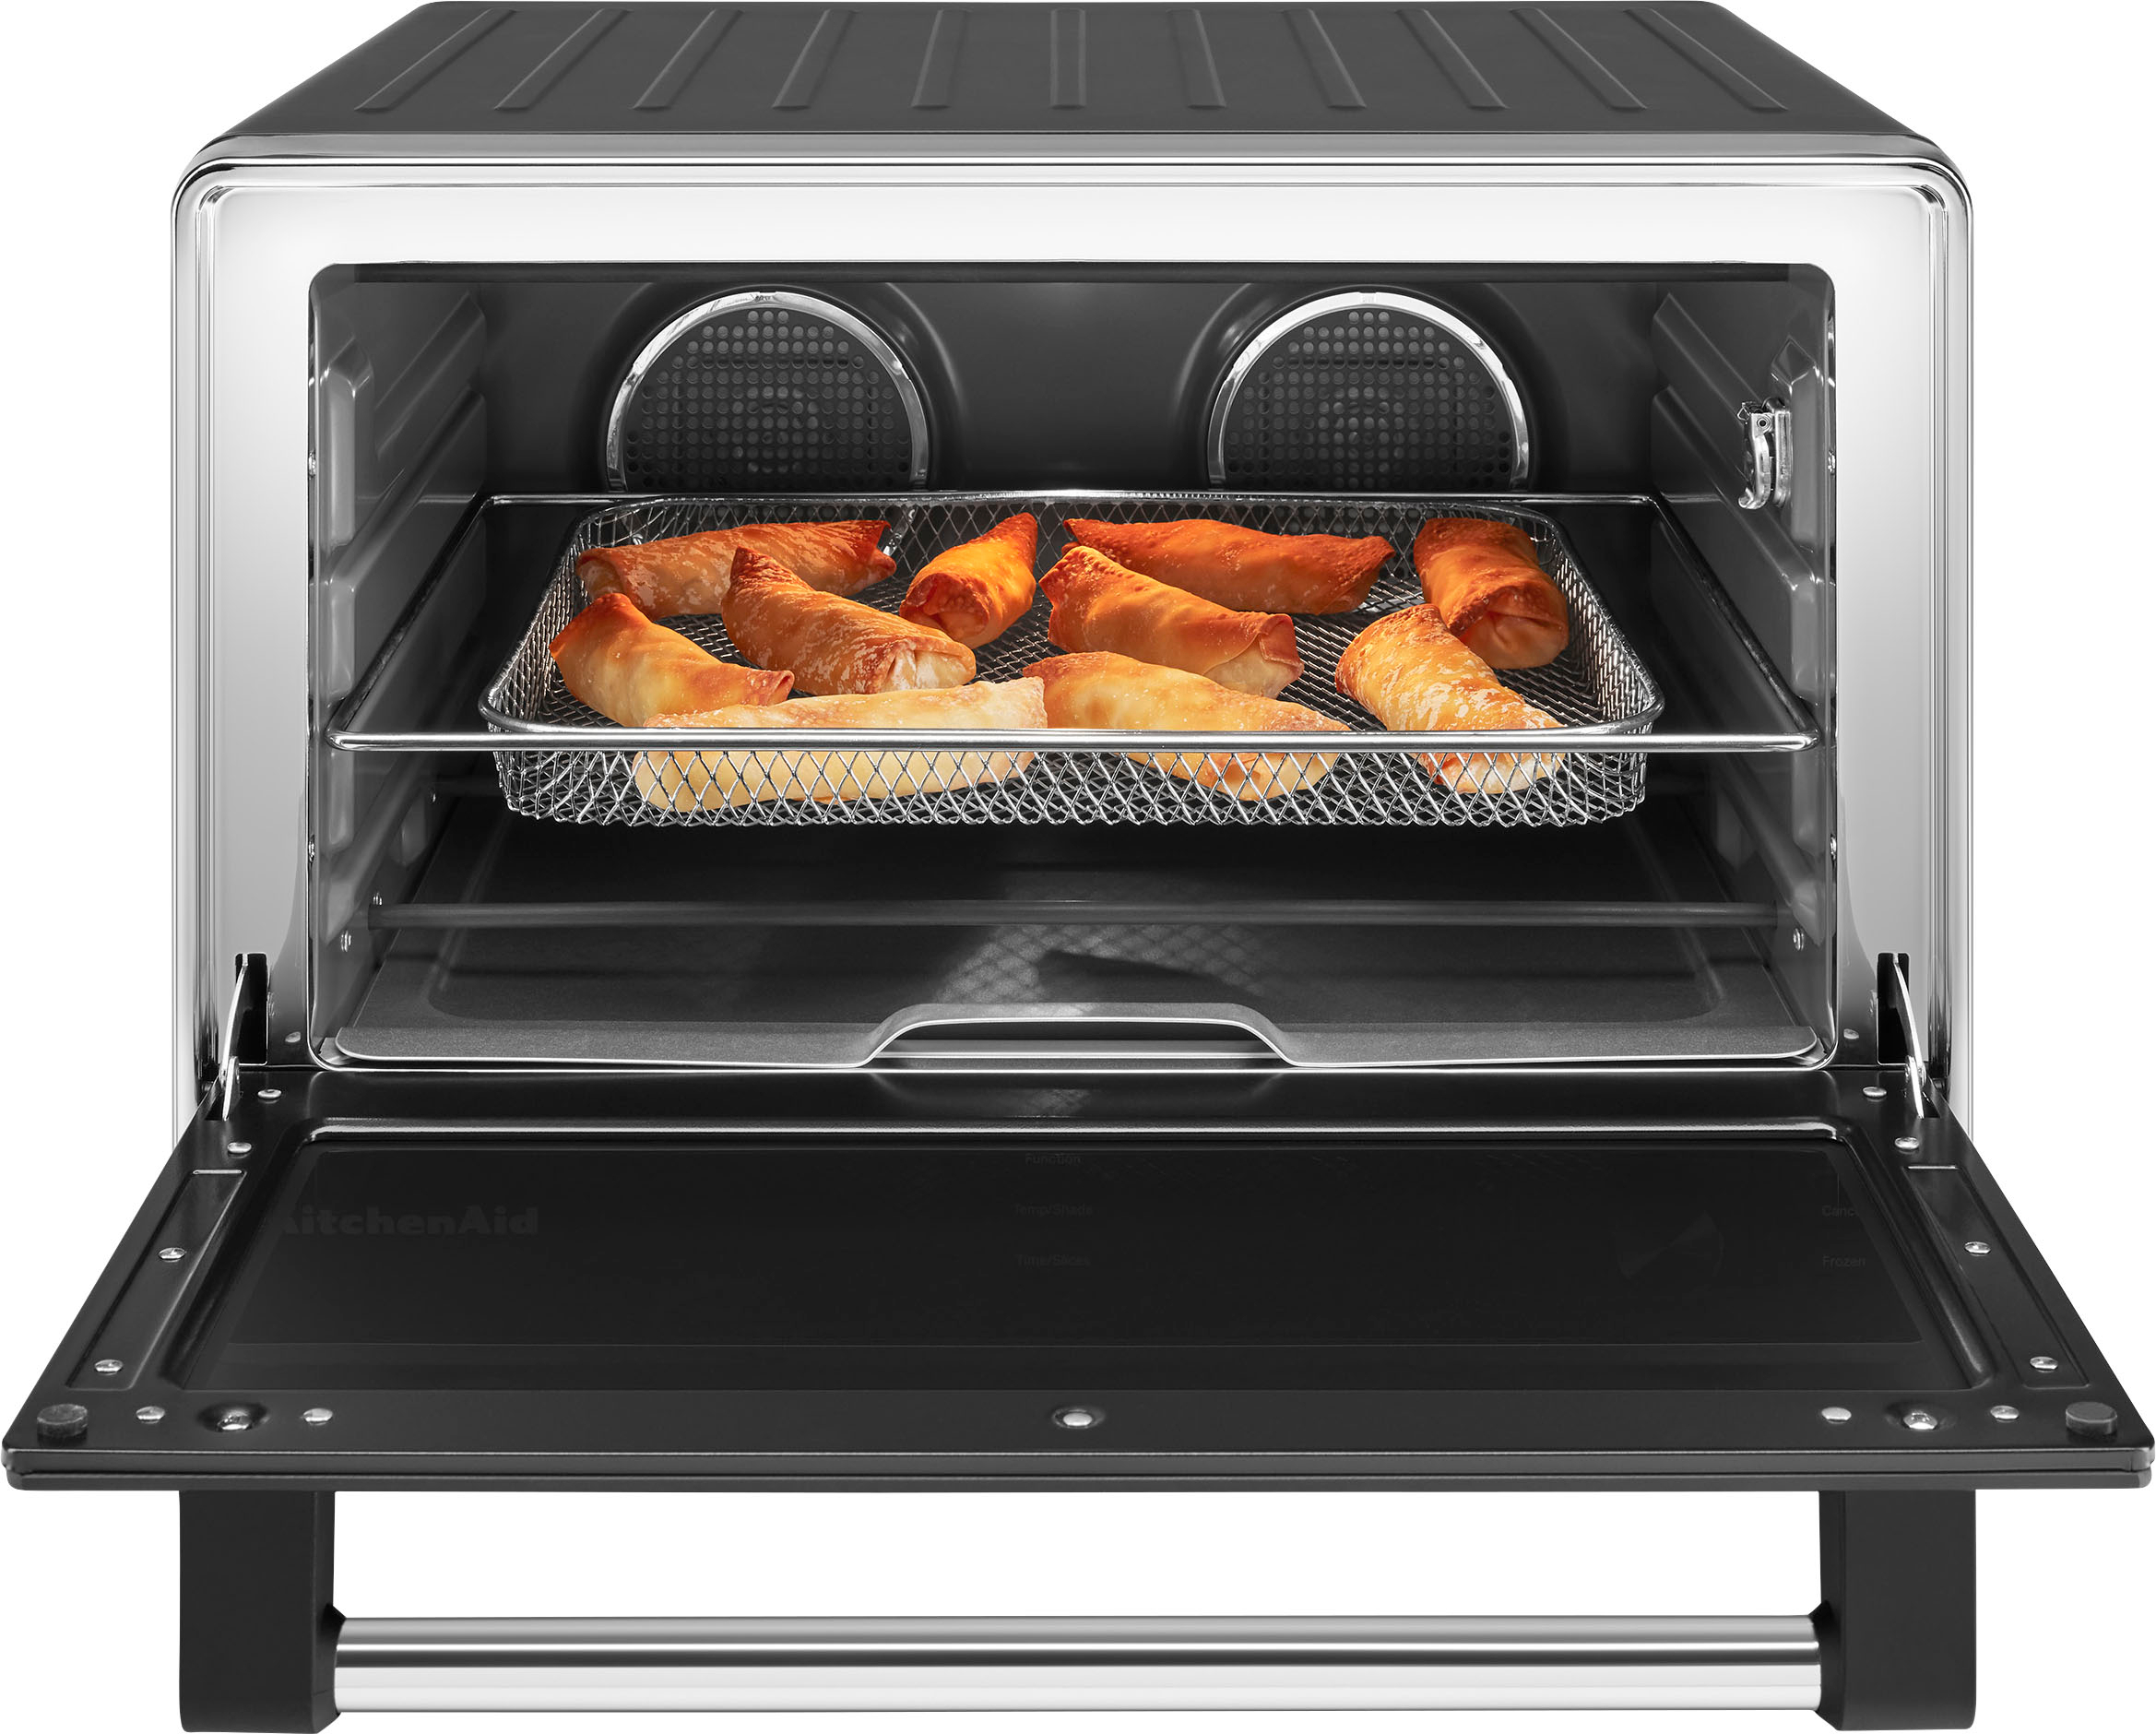 KitchenAid® Dual Convection Countertop Oven with Air Fry and Temperature Probe KCO224 Black Matte KCO224BM - Best Buy